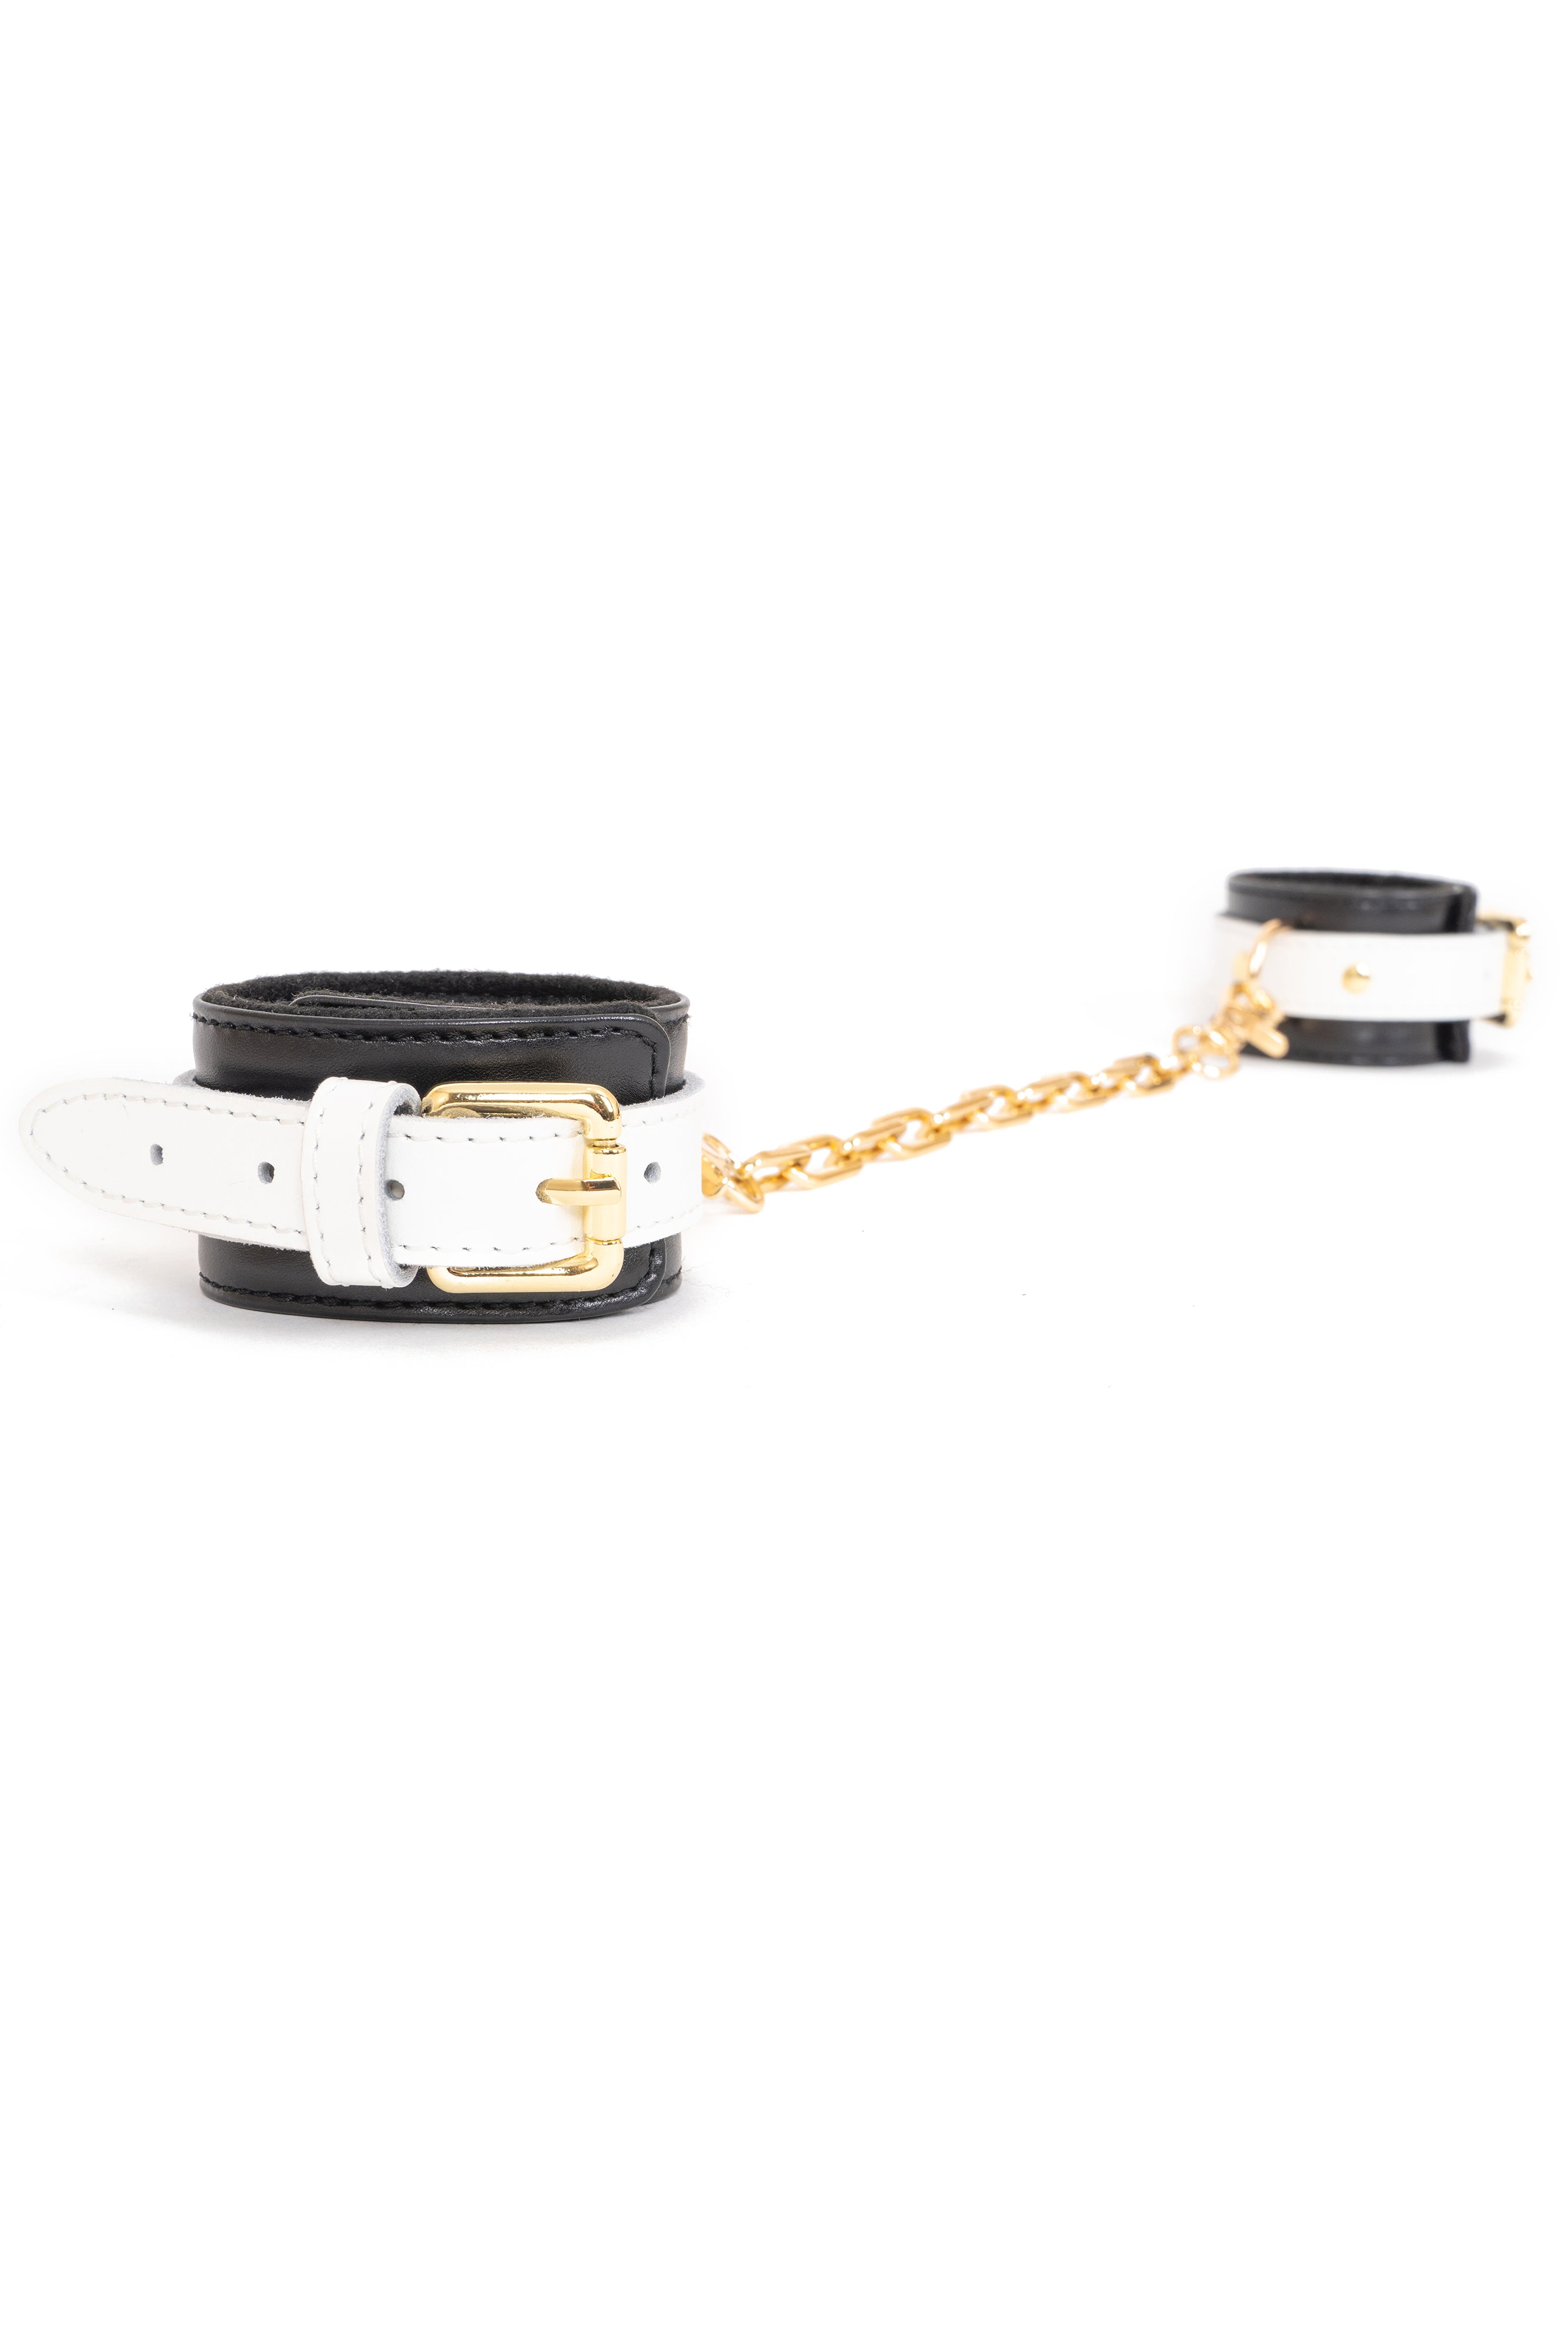 Black'n'White Leather Handcuffs, Ankle cuffs with chain connector